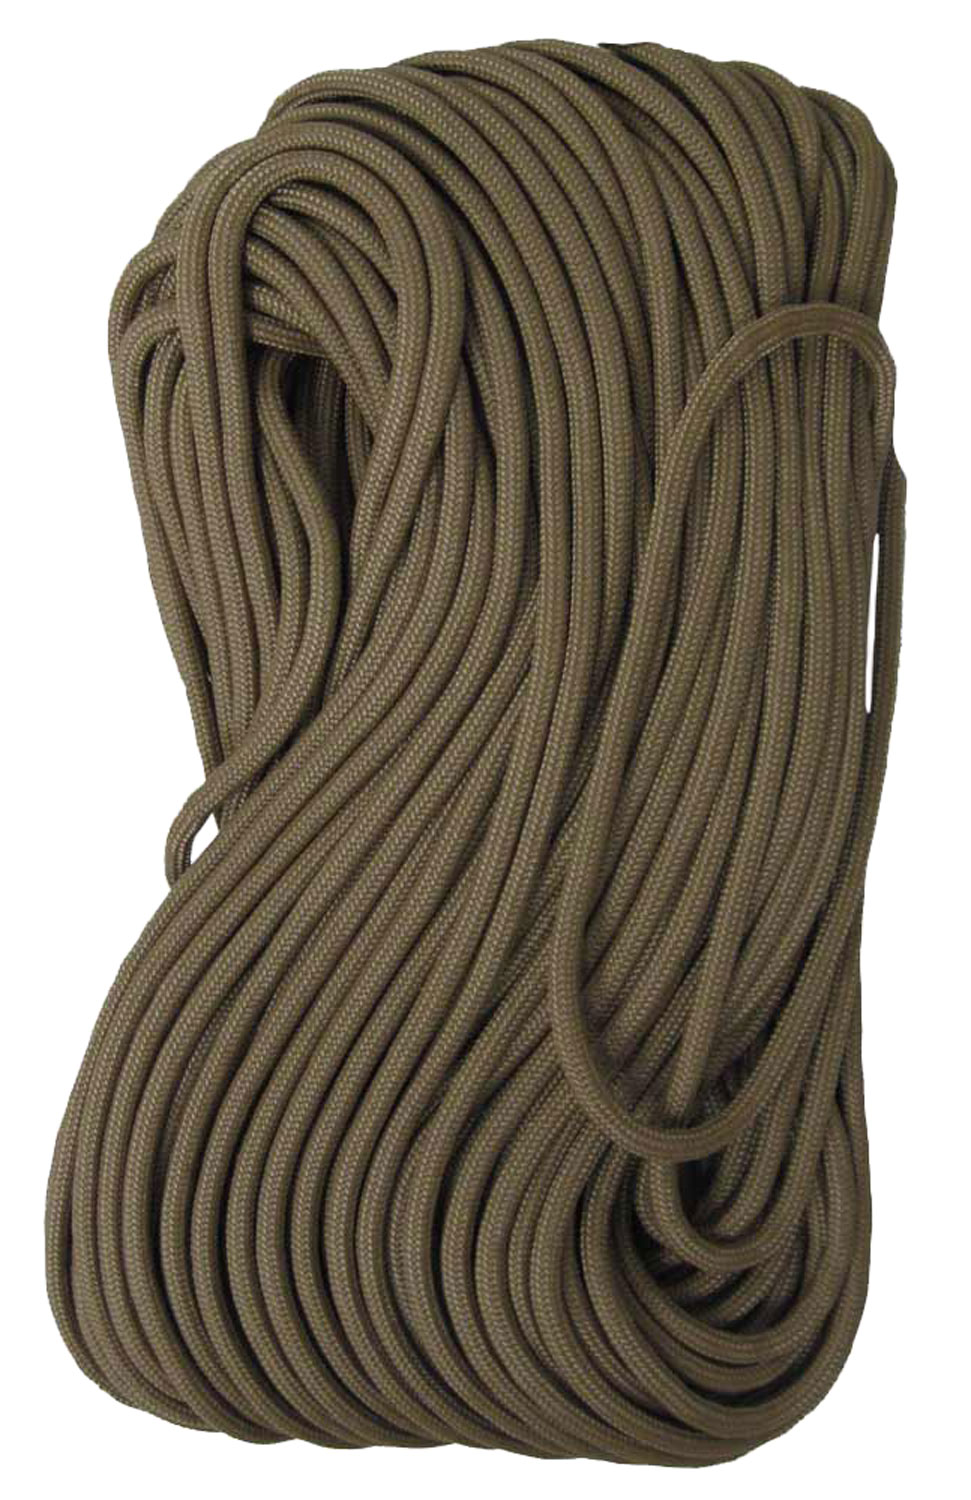 TAC SHIELD CORD TACTICAL 550 OD GREEN 100FT